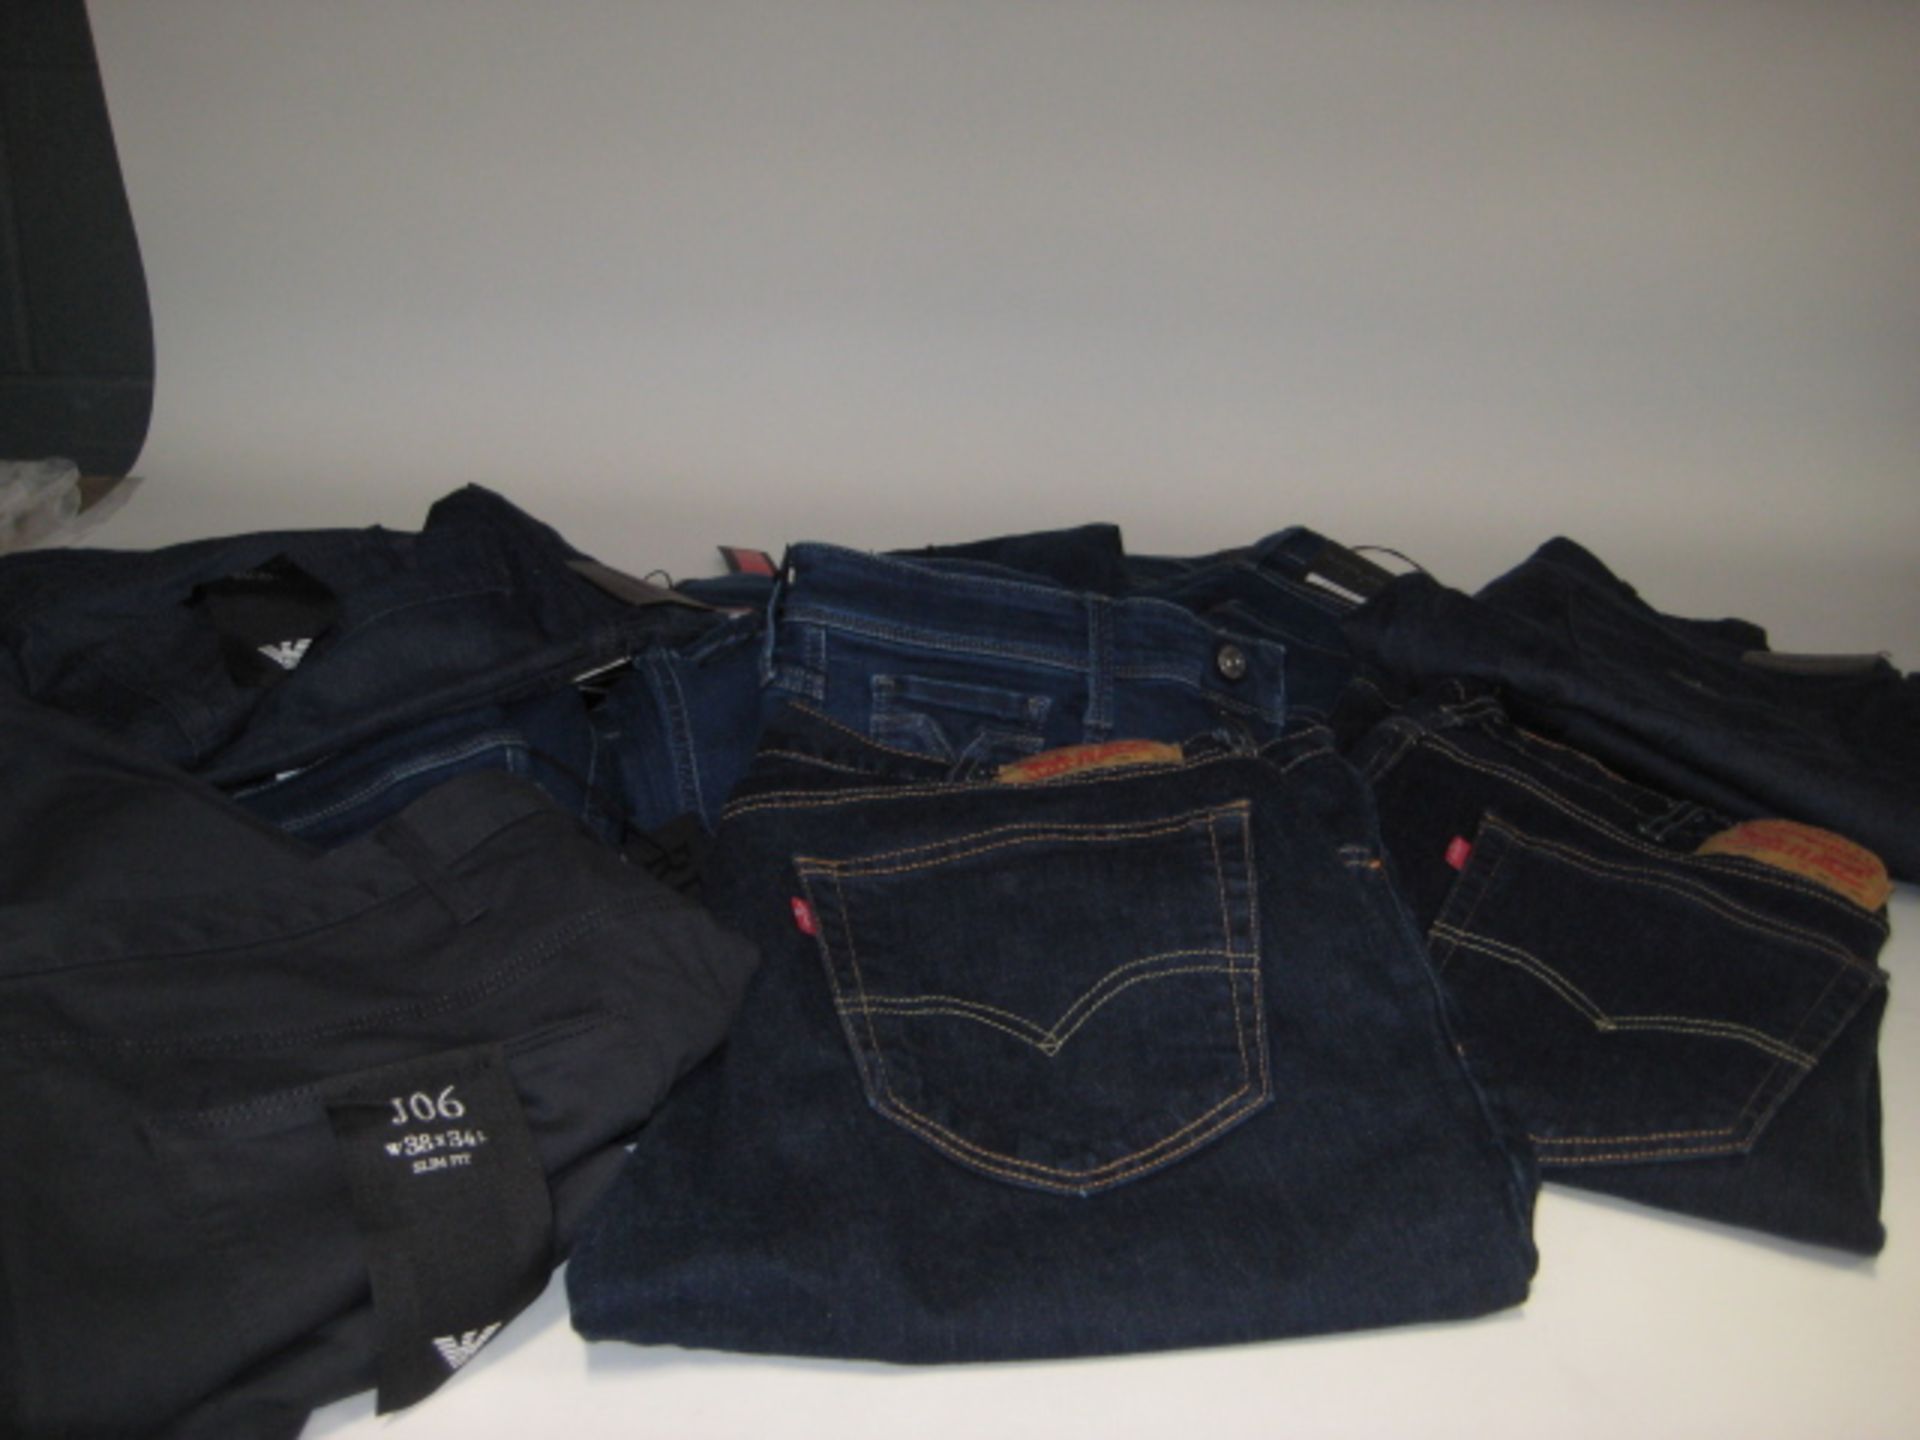 6 pairs of Tag replay jeans various sizes together with 2 pairs of untagged Levi jeans, various